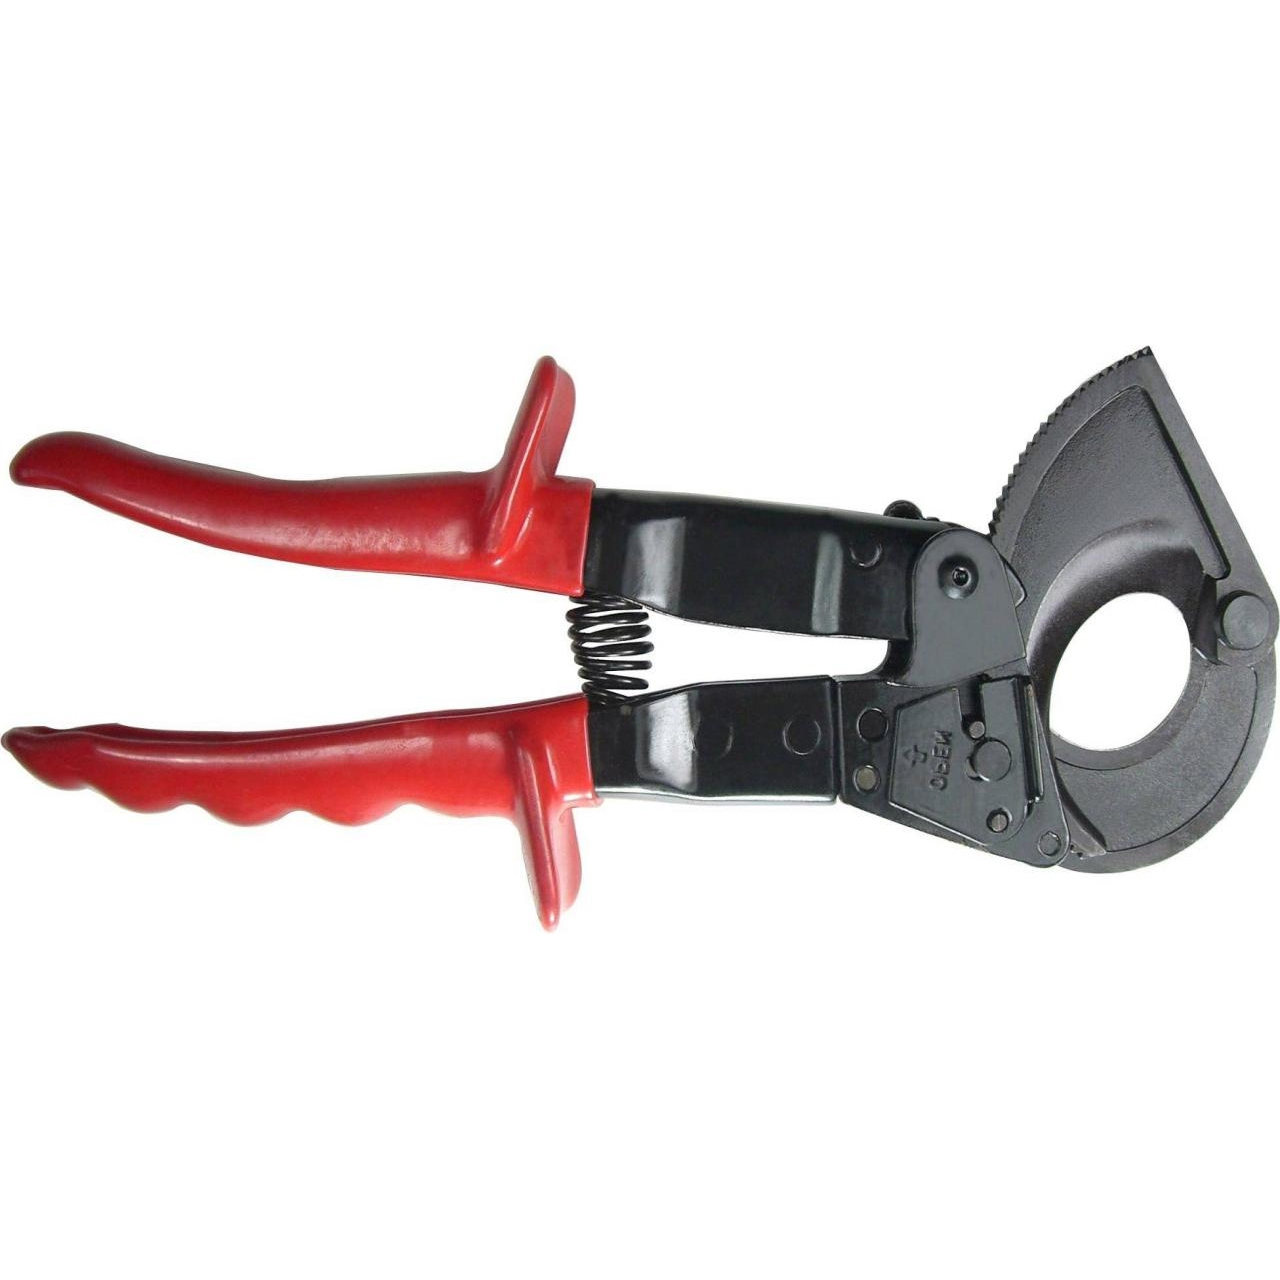 Copper Aluminum Armored Cable Ratchet Cutting Telescopic Manual Cable Cutter